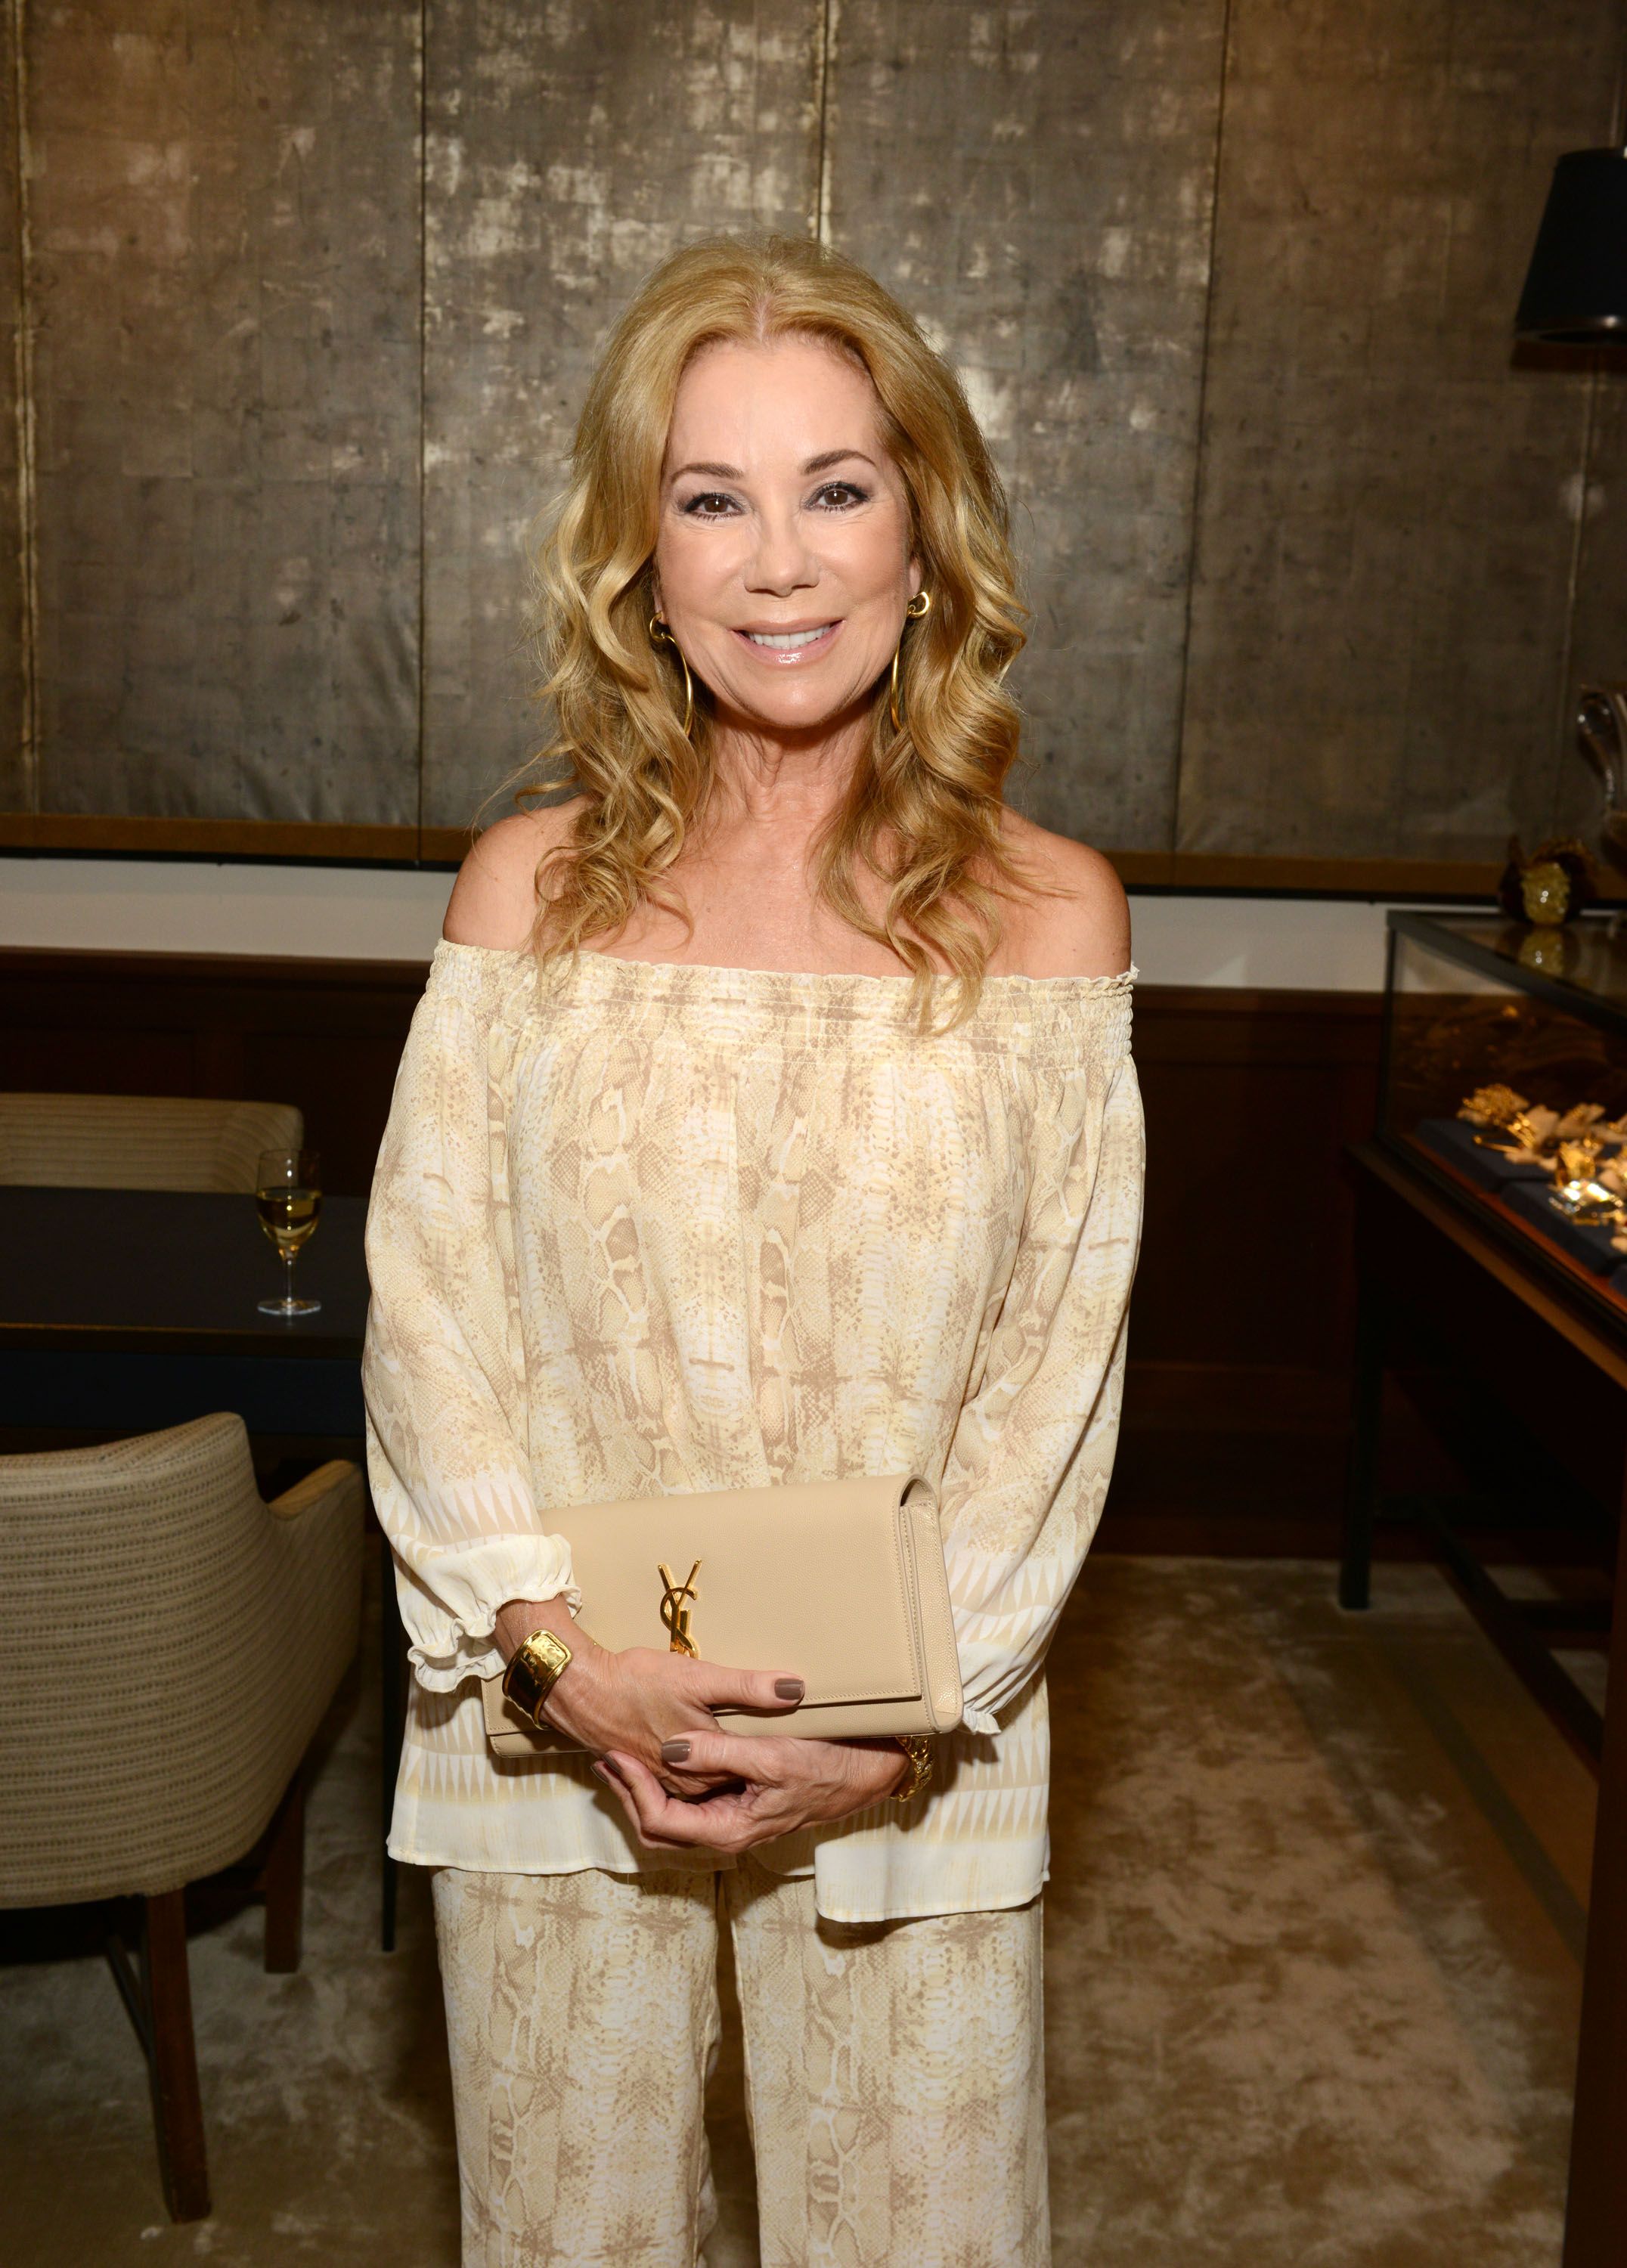 Kathie Lee Gifford at the Changemaker cocktail reception on June 10, 2016, in Connecticut | Photo: Noam Galai/Getty Images